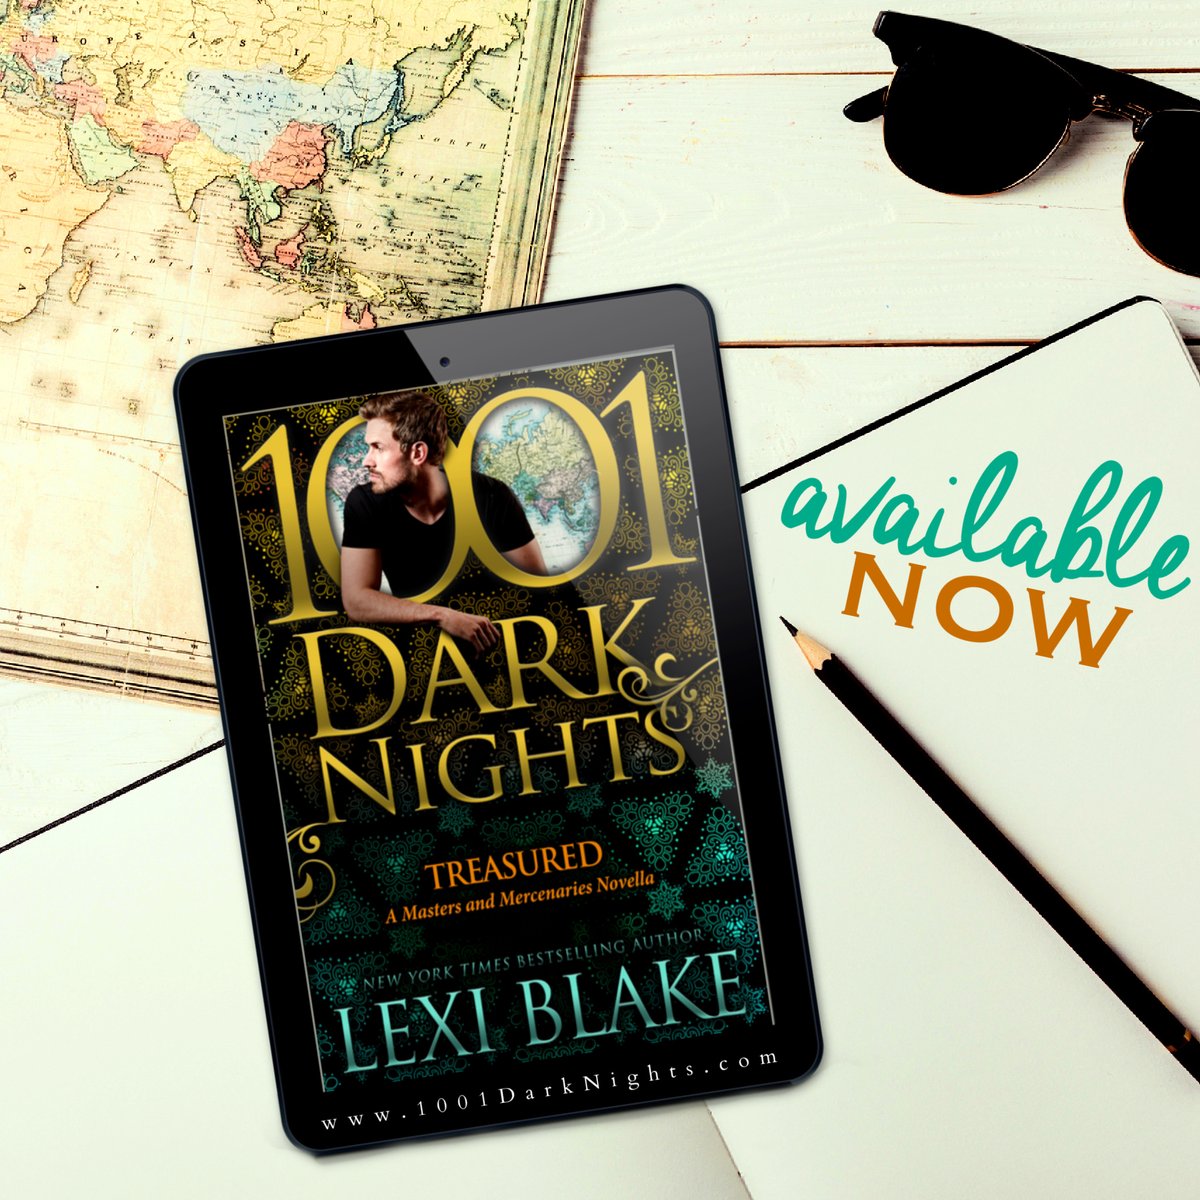 Treasured, a fast-paced and intriguing novella in the A Masters and Mercenaries Series from @lexiblakeauthor and @1001darknights_blueboxpress is available now!

Grab your copy today→ zcu.io/8qc0 

#commissionearned #romancebooks #romanceaddicts  @socialbutterfly_pr